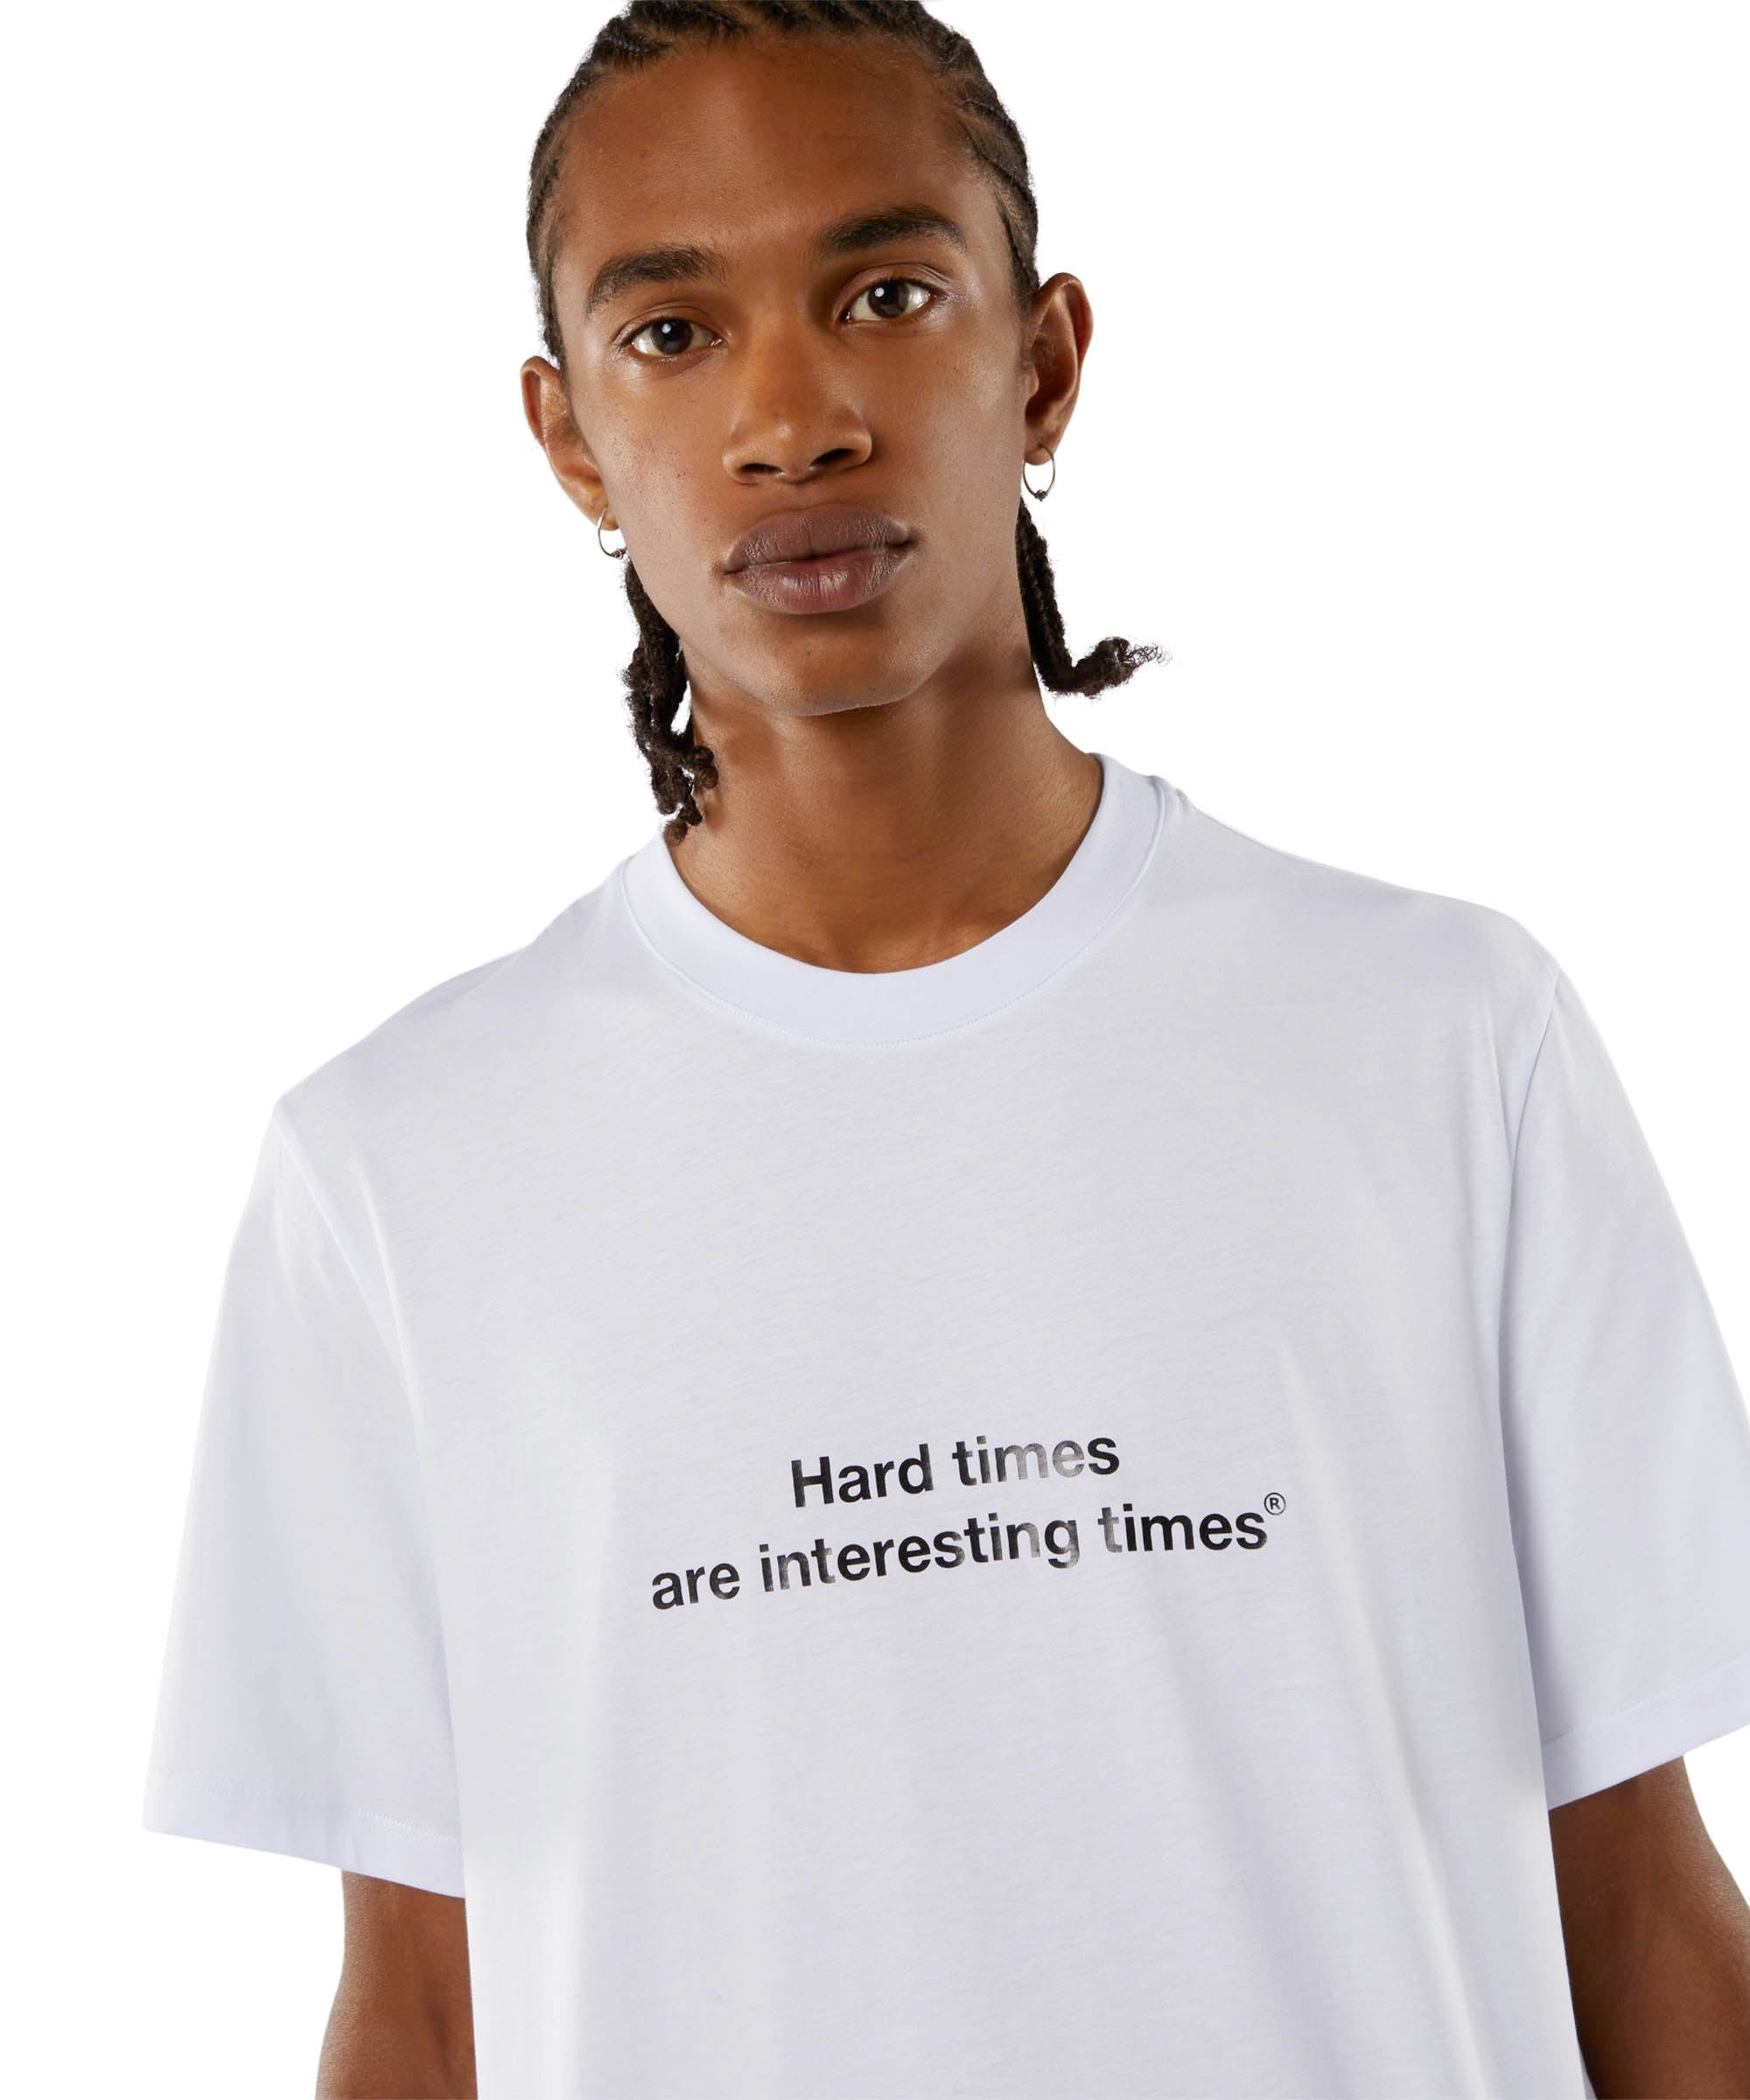 T-shirt quote "Hard times are interesting times" - 2